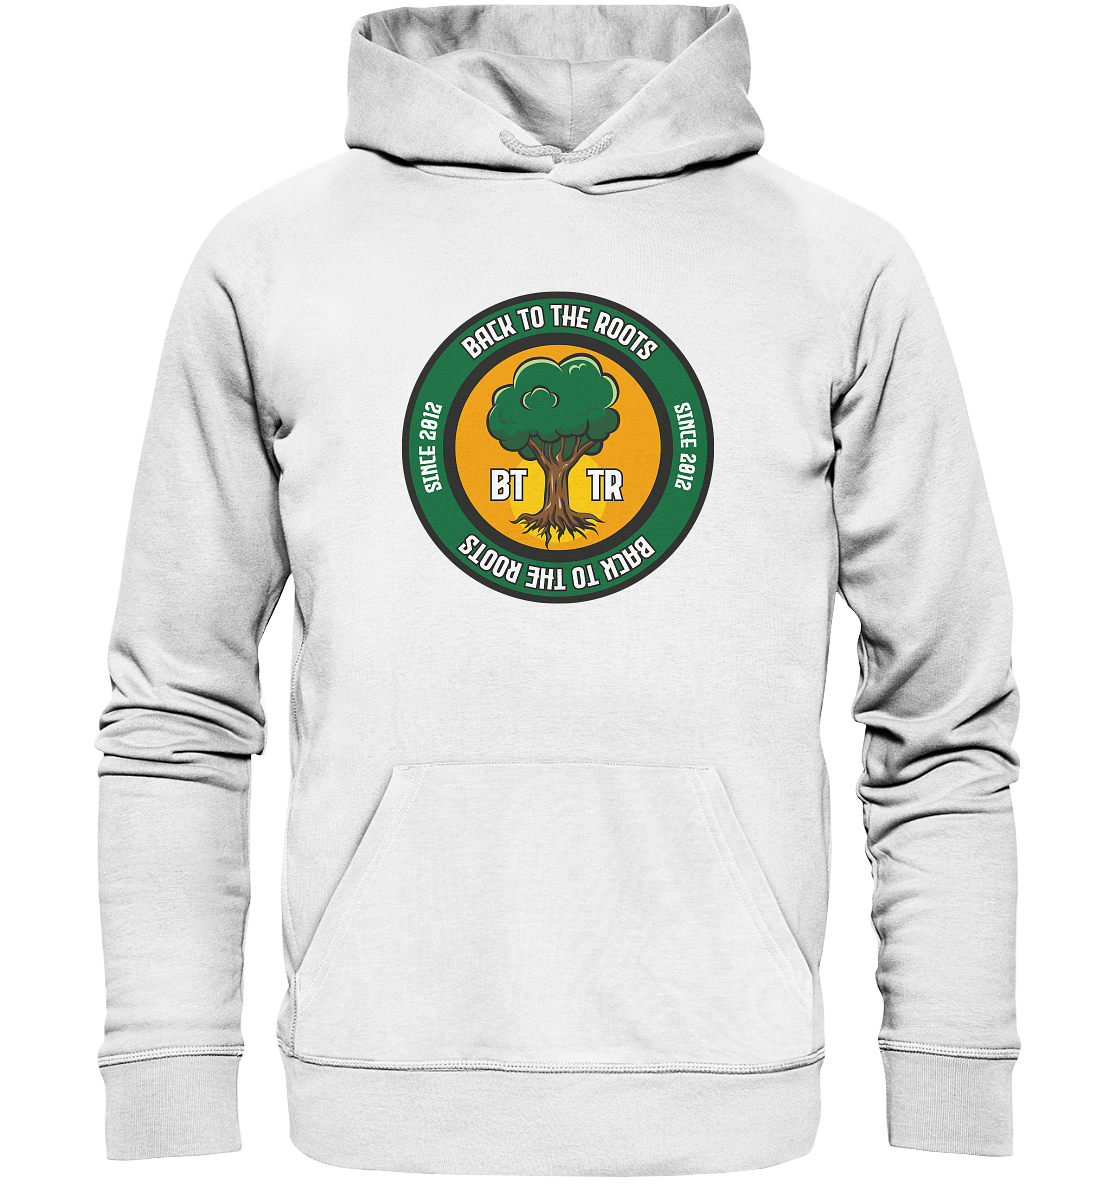 BACK TO THE ROOTS -  Basic Hoodie